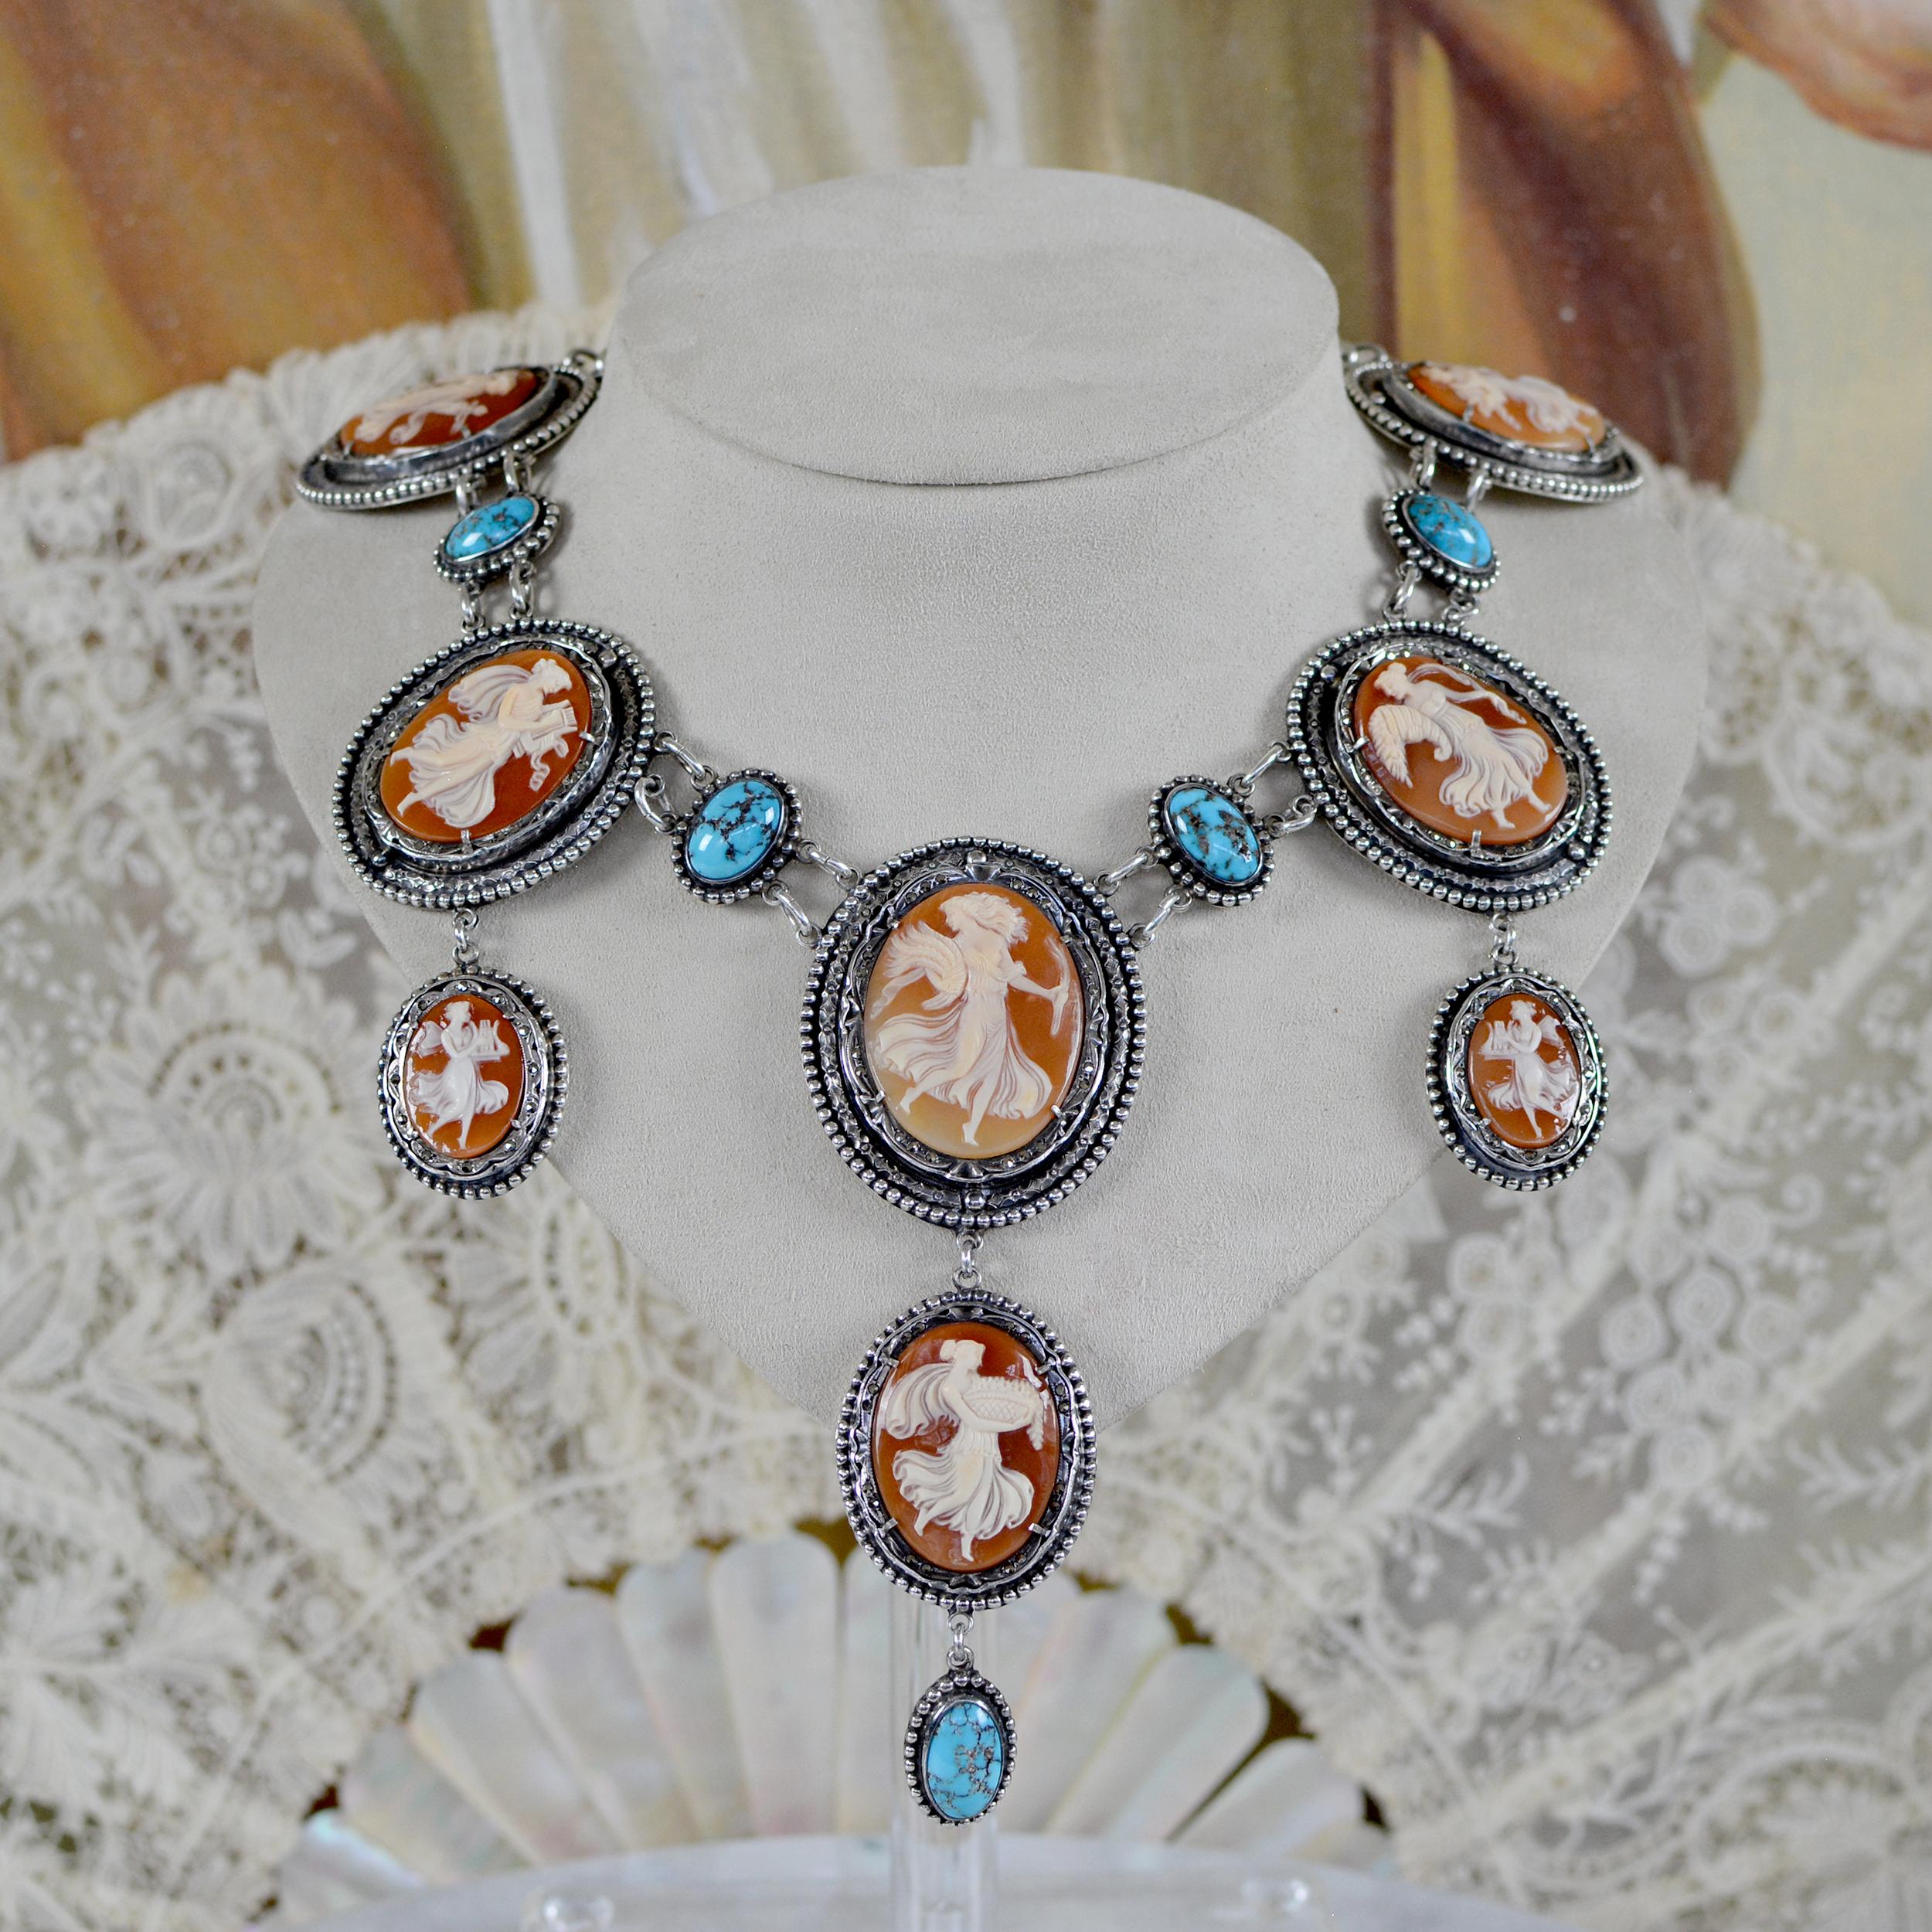 This exquisite hand crafted, one of a kind Baroque style necklace from designer Jill Garber features eight ( 8 ) finely carved, late nineteenth century natural shell cameos depicting Terpsichore, one of the nine Muses in Greek mythology paired with